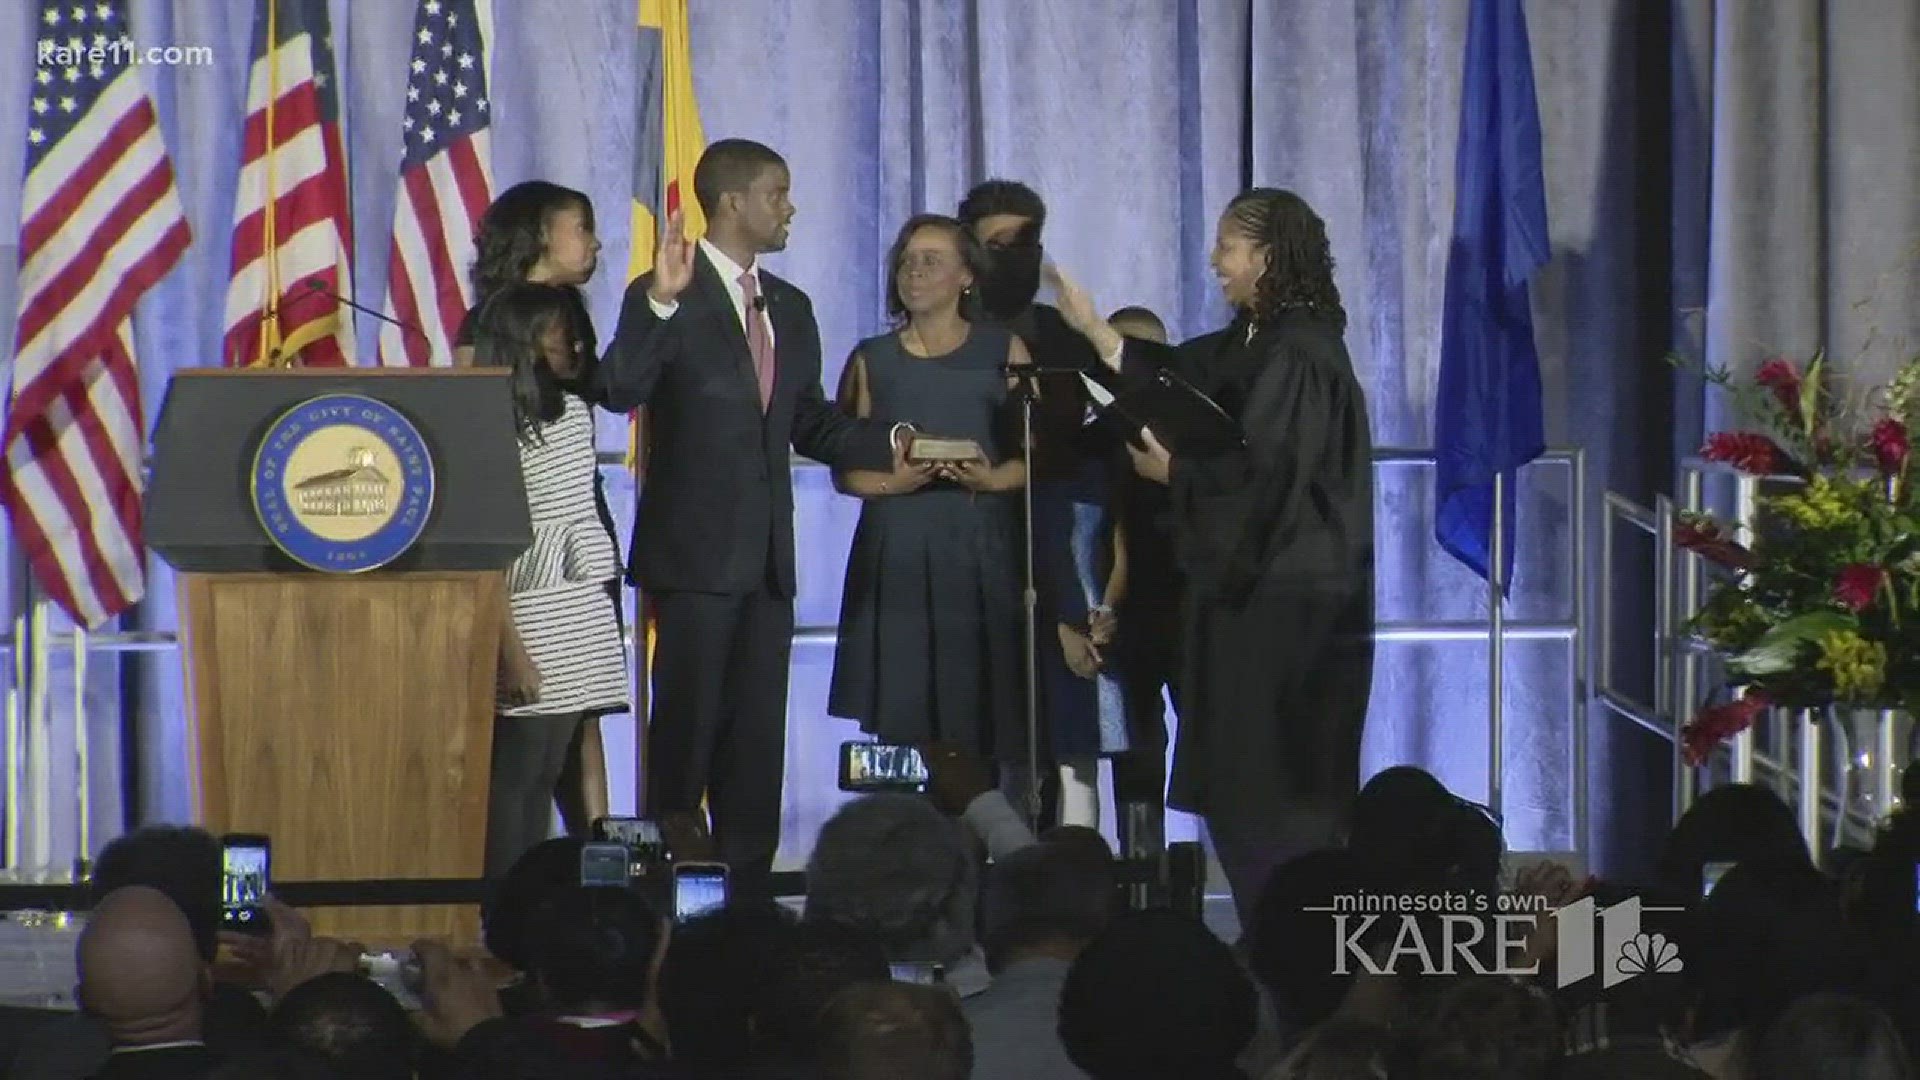 Melvin Carter was sworn in as the mayor of St. Paul Tuesday. "Our City Hall won't be designed to simply lift my voice, but to lift every voice," he said. http://kare11.tv/2qhuGTK